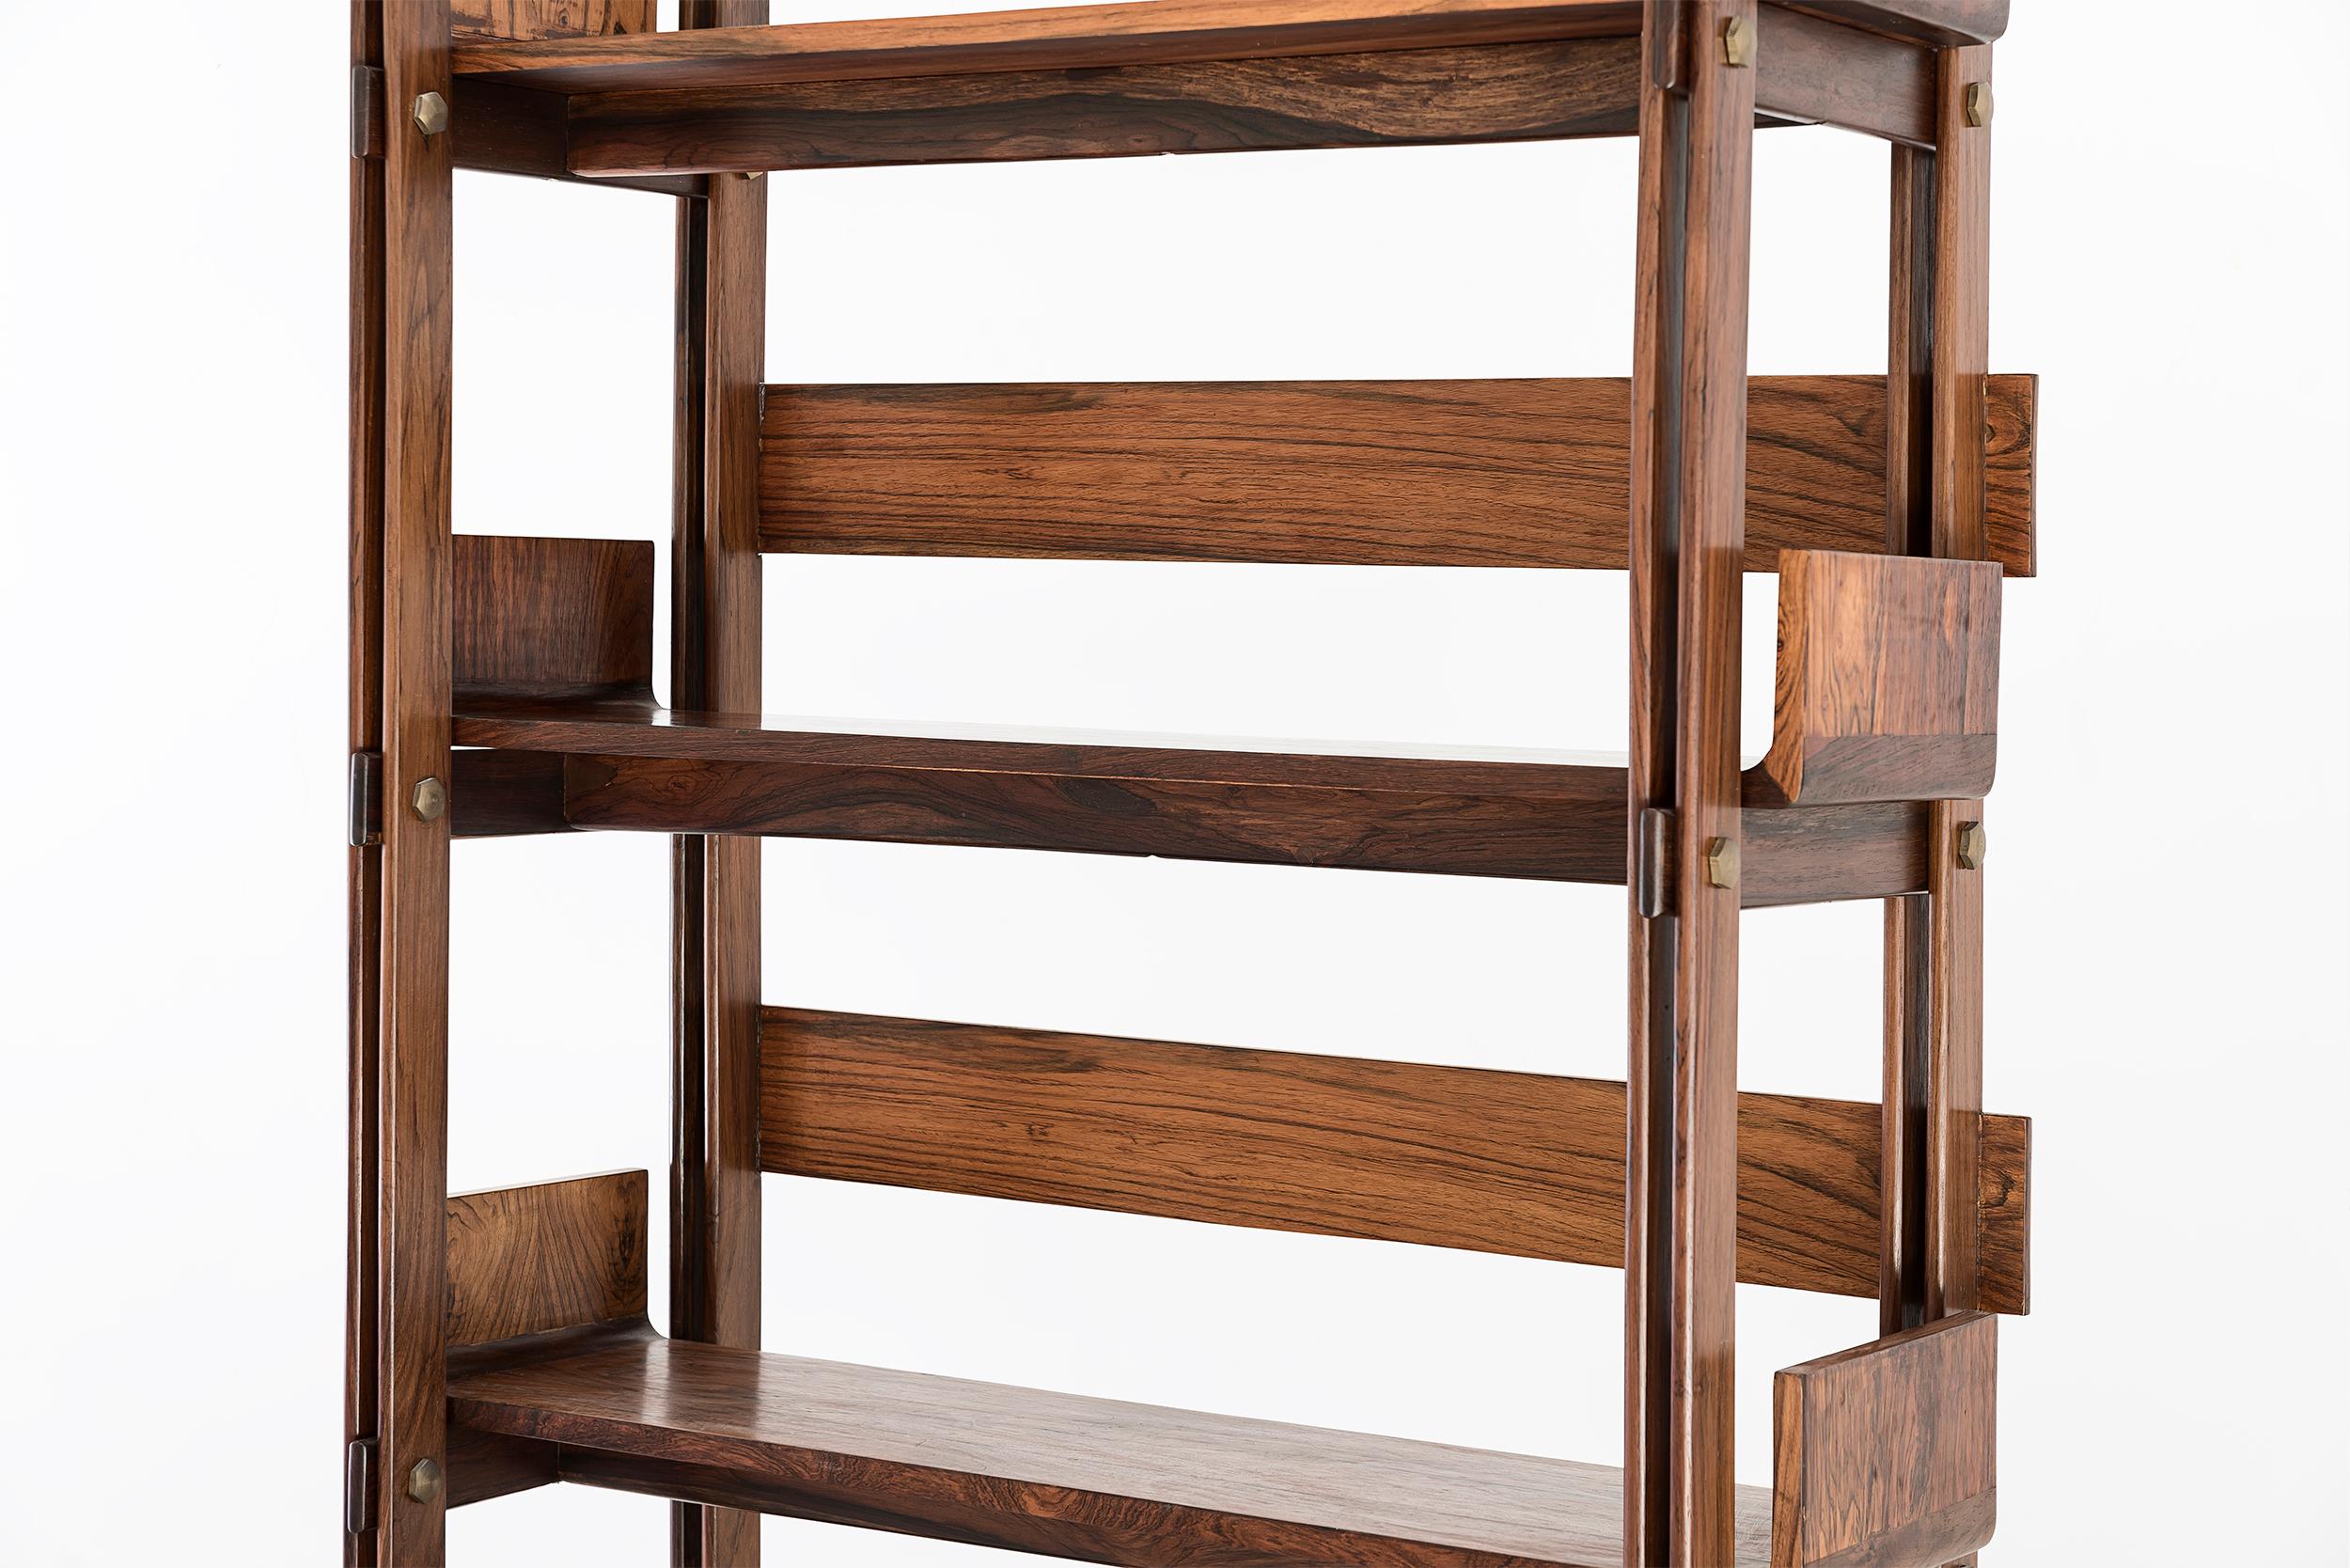 Mid-20th Century Sergio Rodrigues Pair of bookcases Manufactured by Oca Brasil, 1960 For Sale